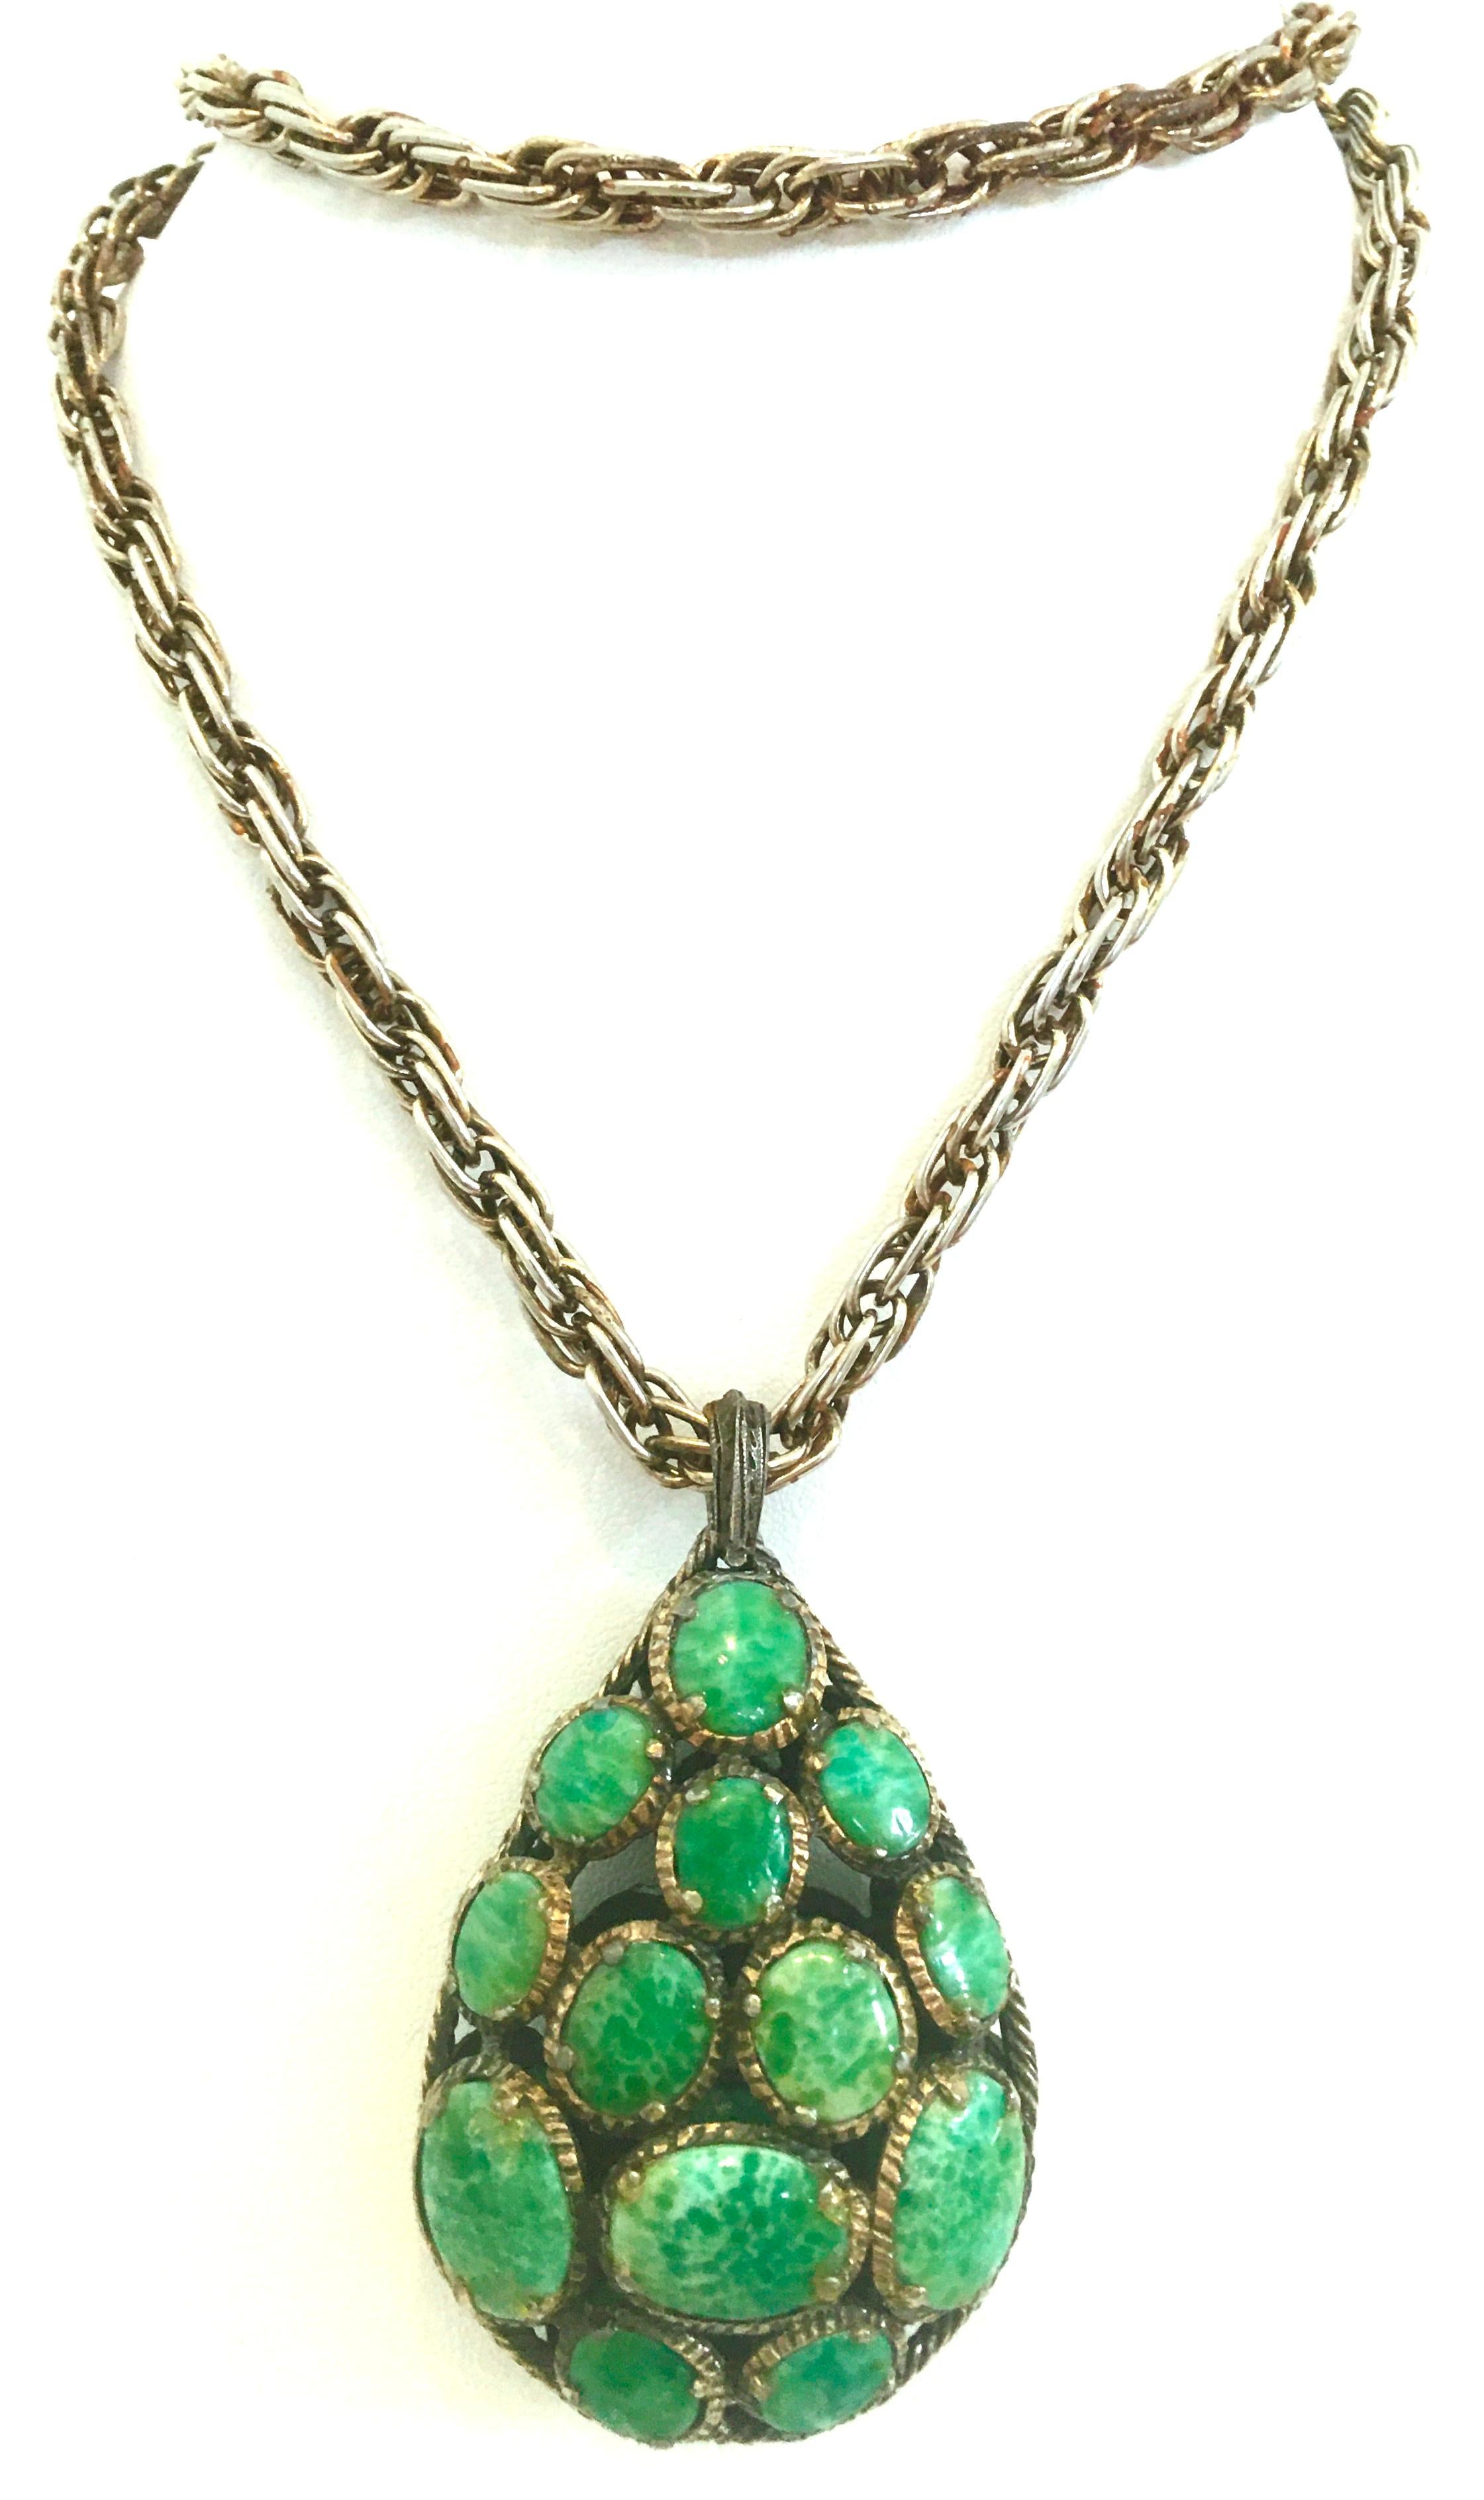 20th Century Crown Trifari Silver Plate & Faux Turquoise Locket Style Pendant Necklace. This rare and coveted piece features a silver rope style chain link necklace and monumental in size locket style green faux turquoise stone pendant. The pendant